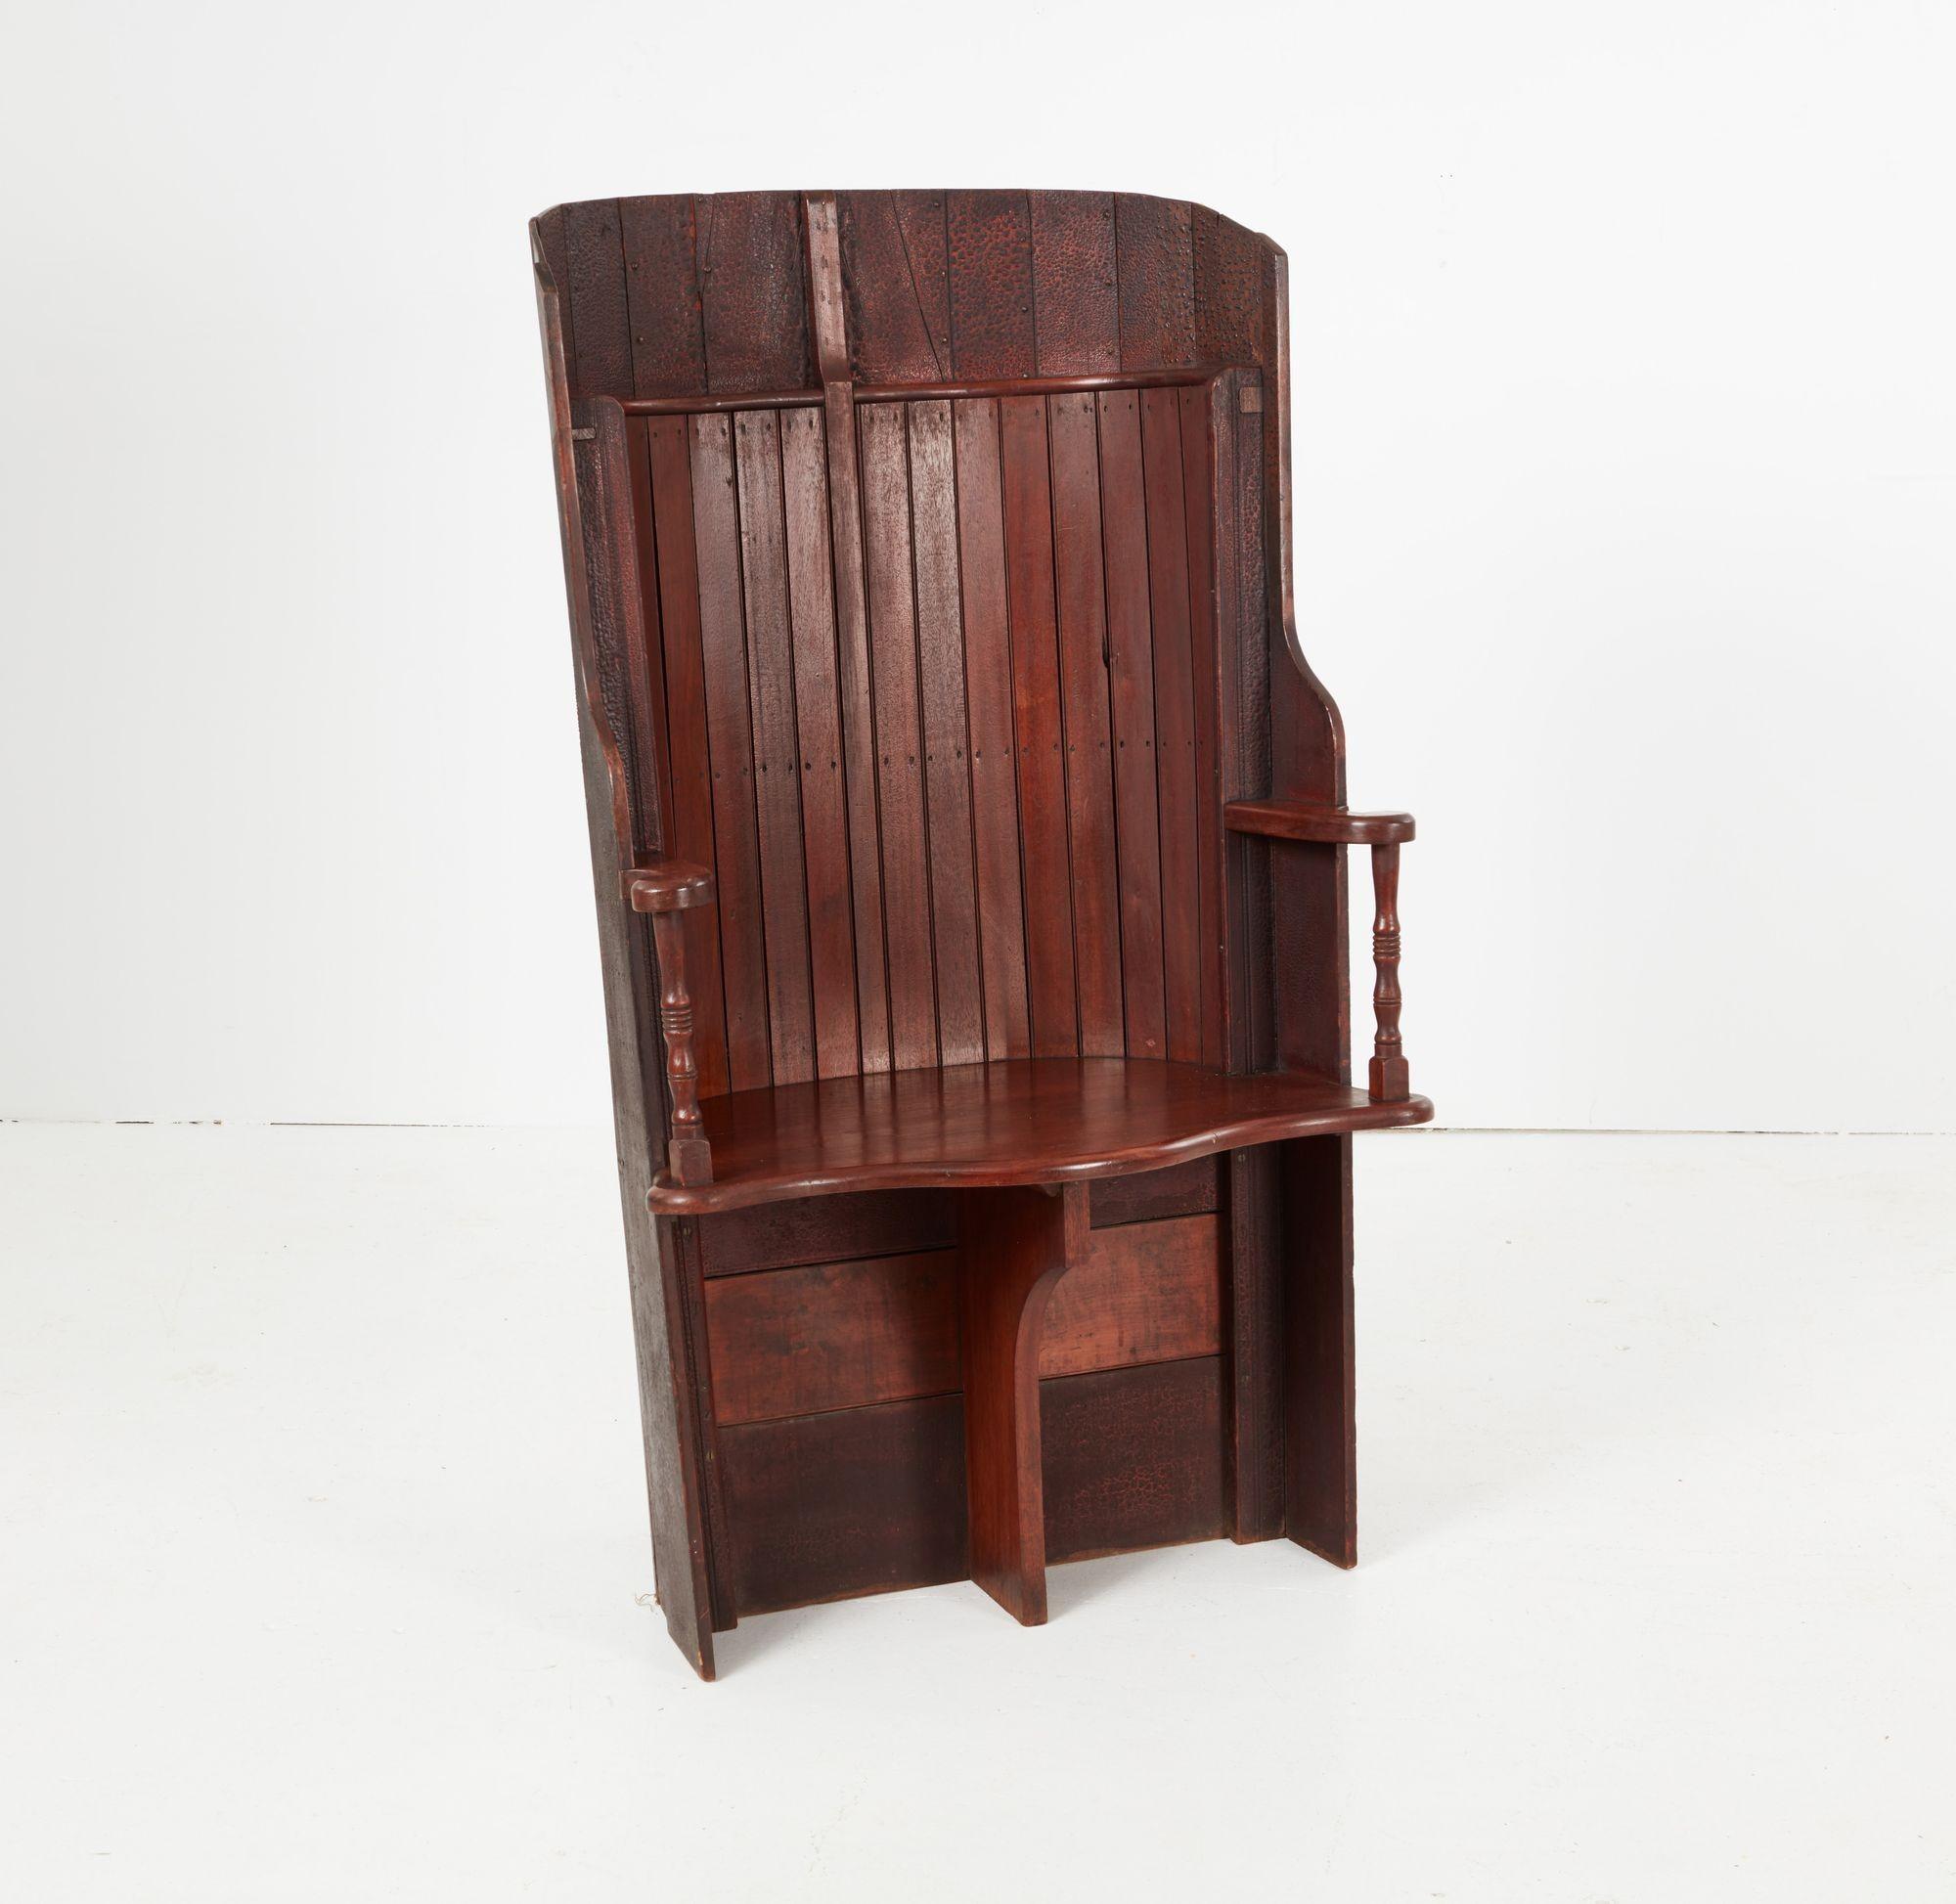 A unique armchair with an enveloping raked barrel back made from the ship-lapped hull of a wherry boat, retaining its historic scumble surface. Featuring an inner band of polished lap, outswept arms on turned supports, and a shaped seat with central